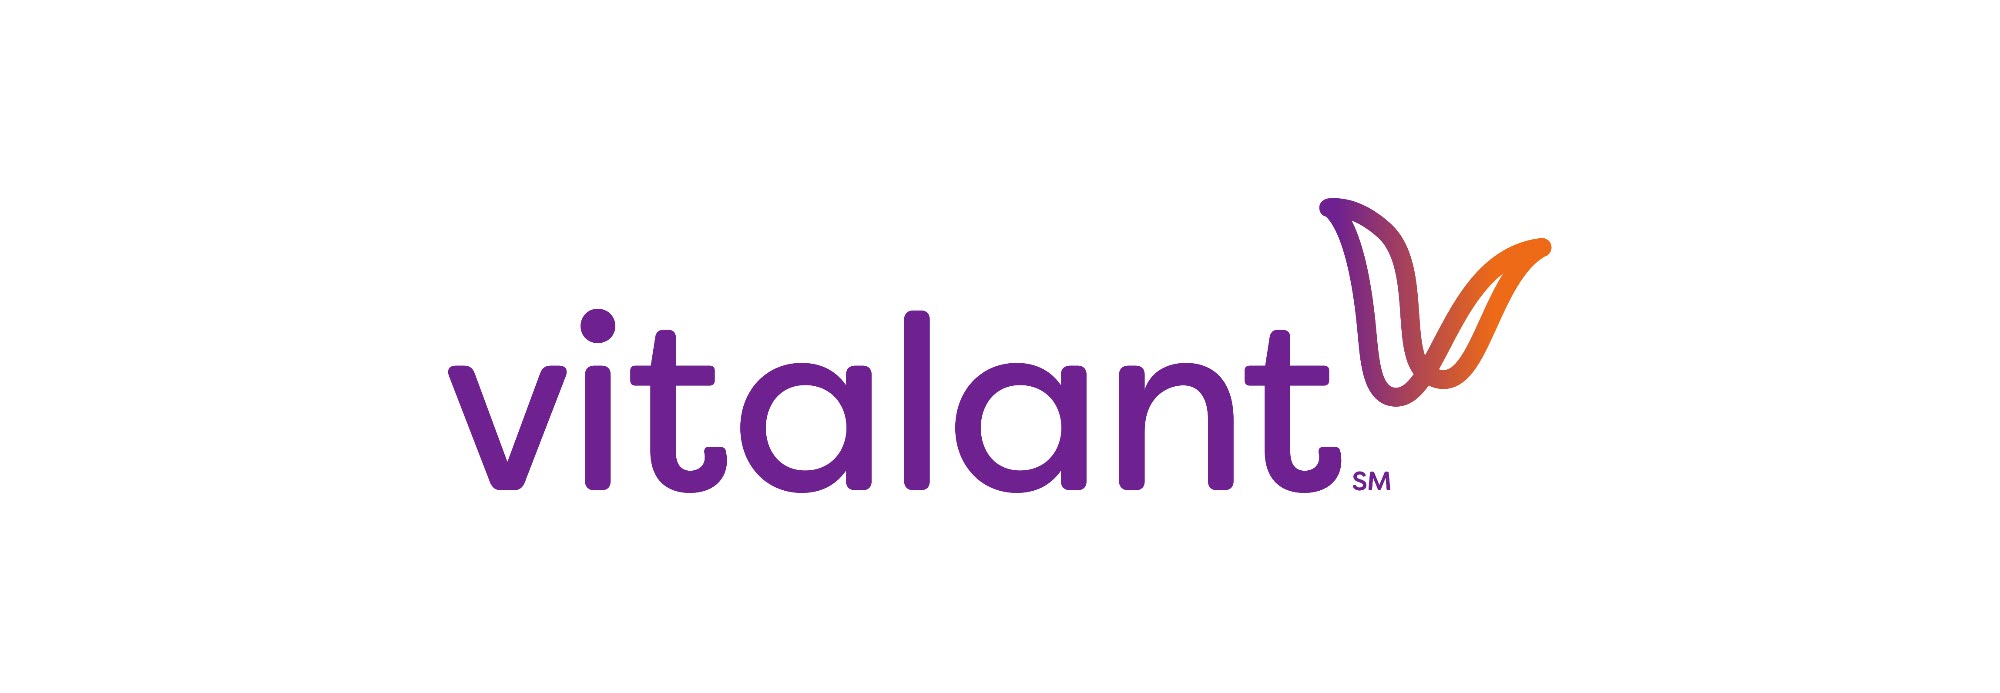 vitalant logo with butterfly